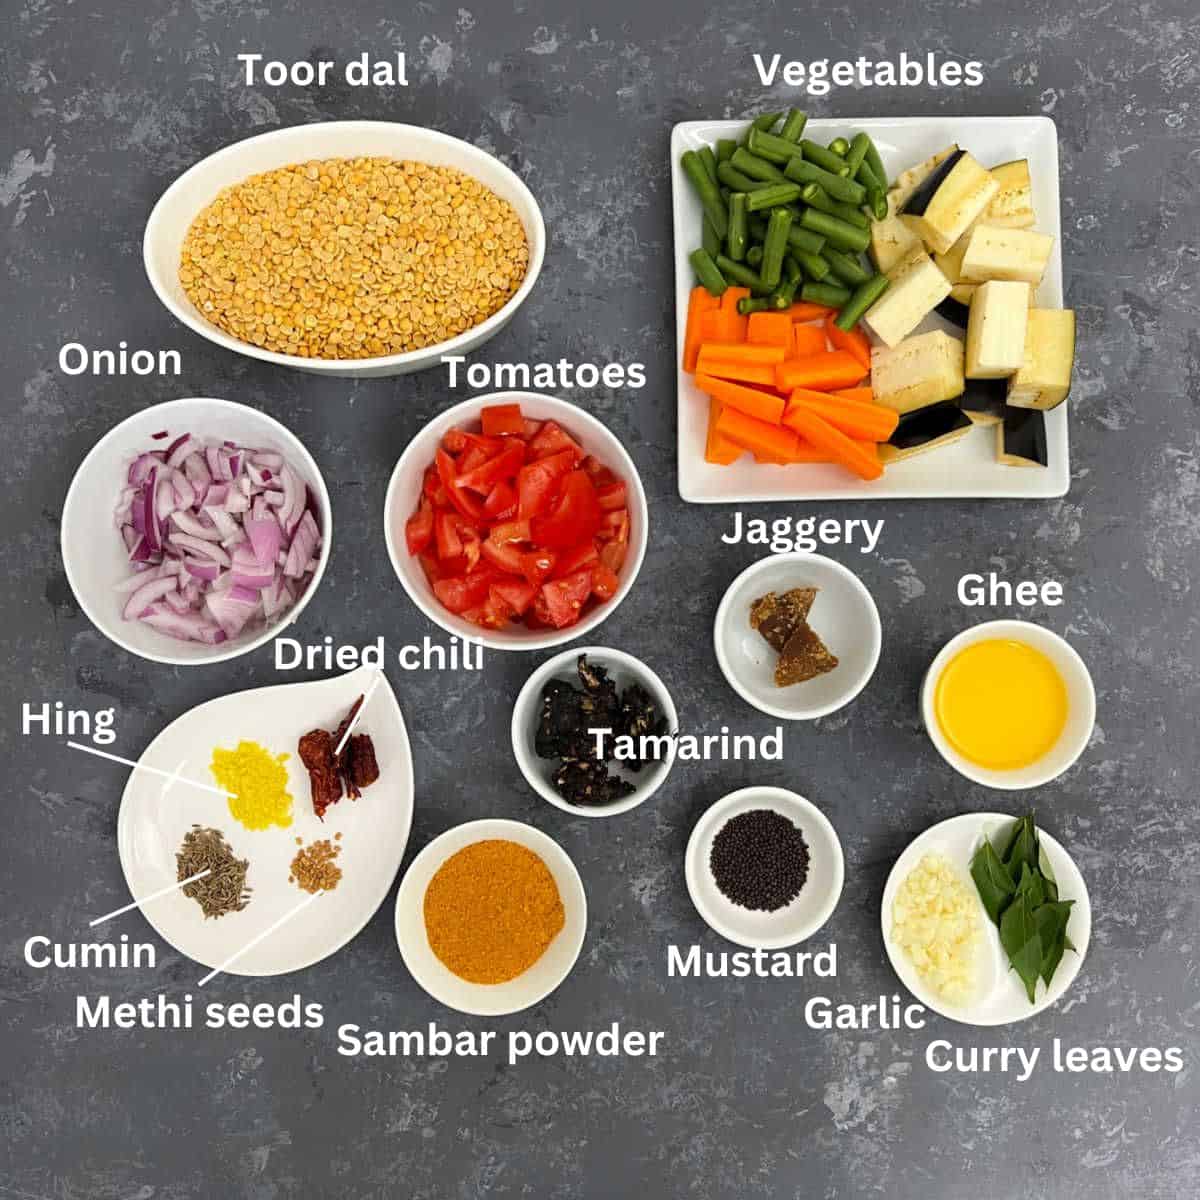 Vegetable sambar ingredients placed on a grey surface.